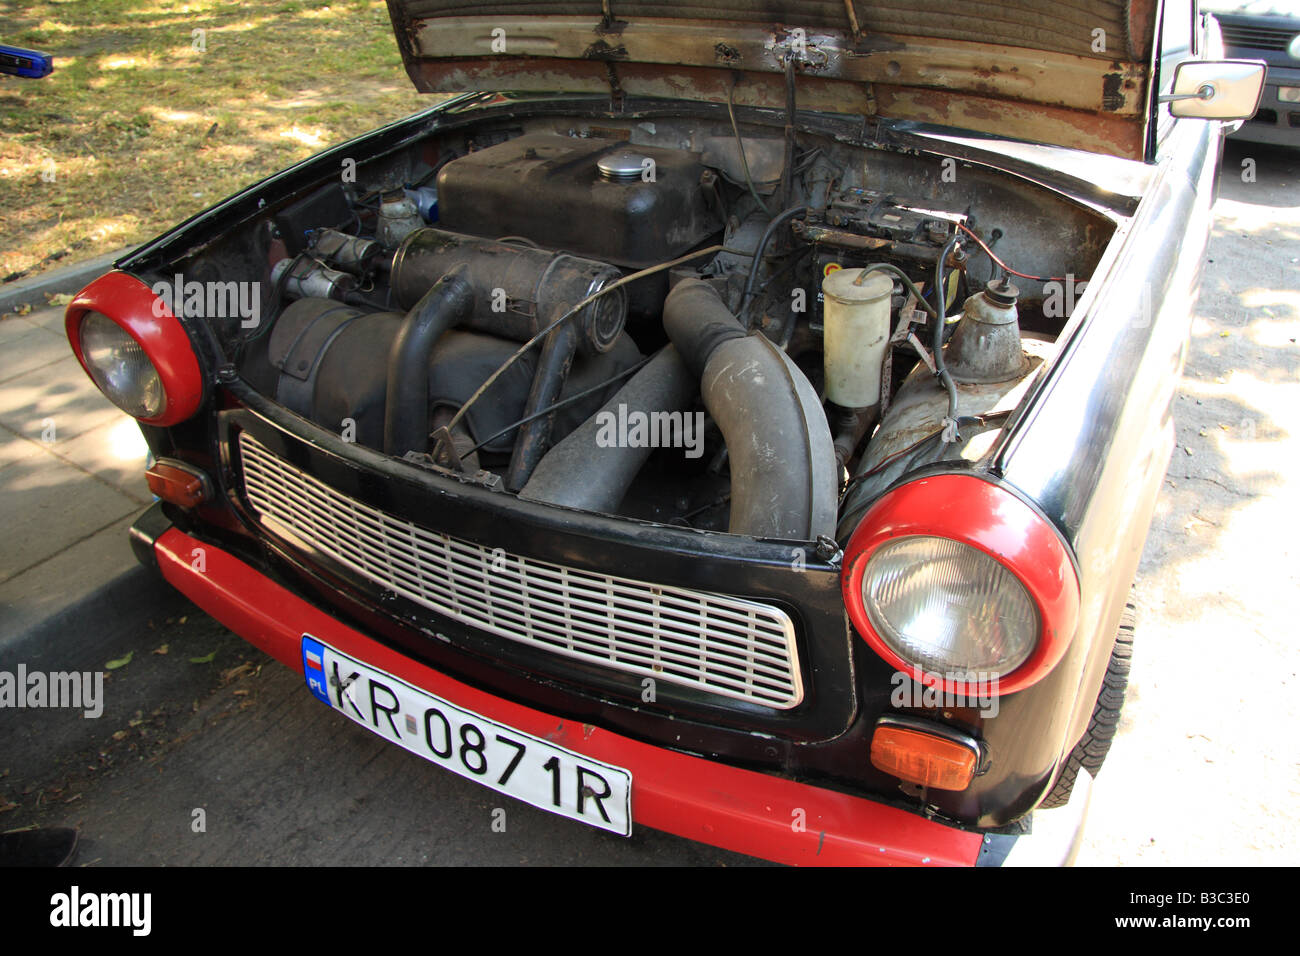 Engine compartment of a Trabant car in Nowa Huta, Poland Stock Photo